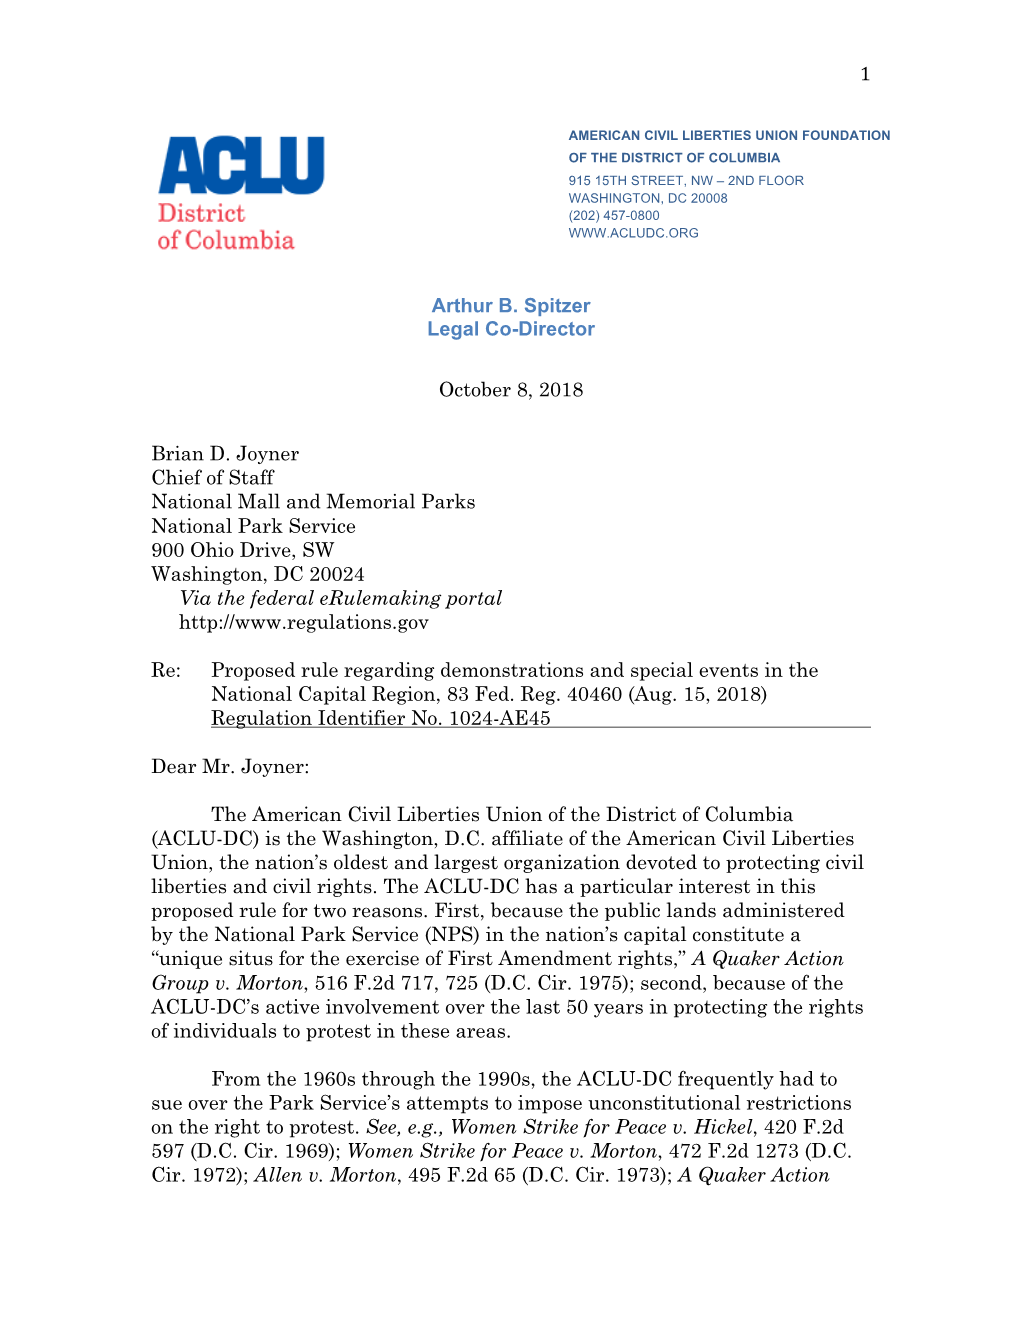 ACLU NPS Comments 2018-10-08